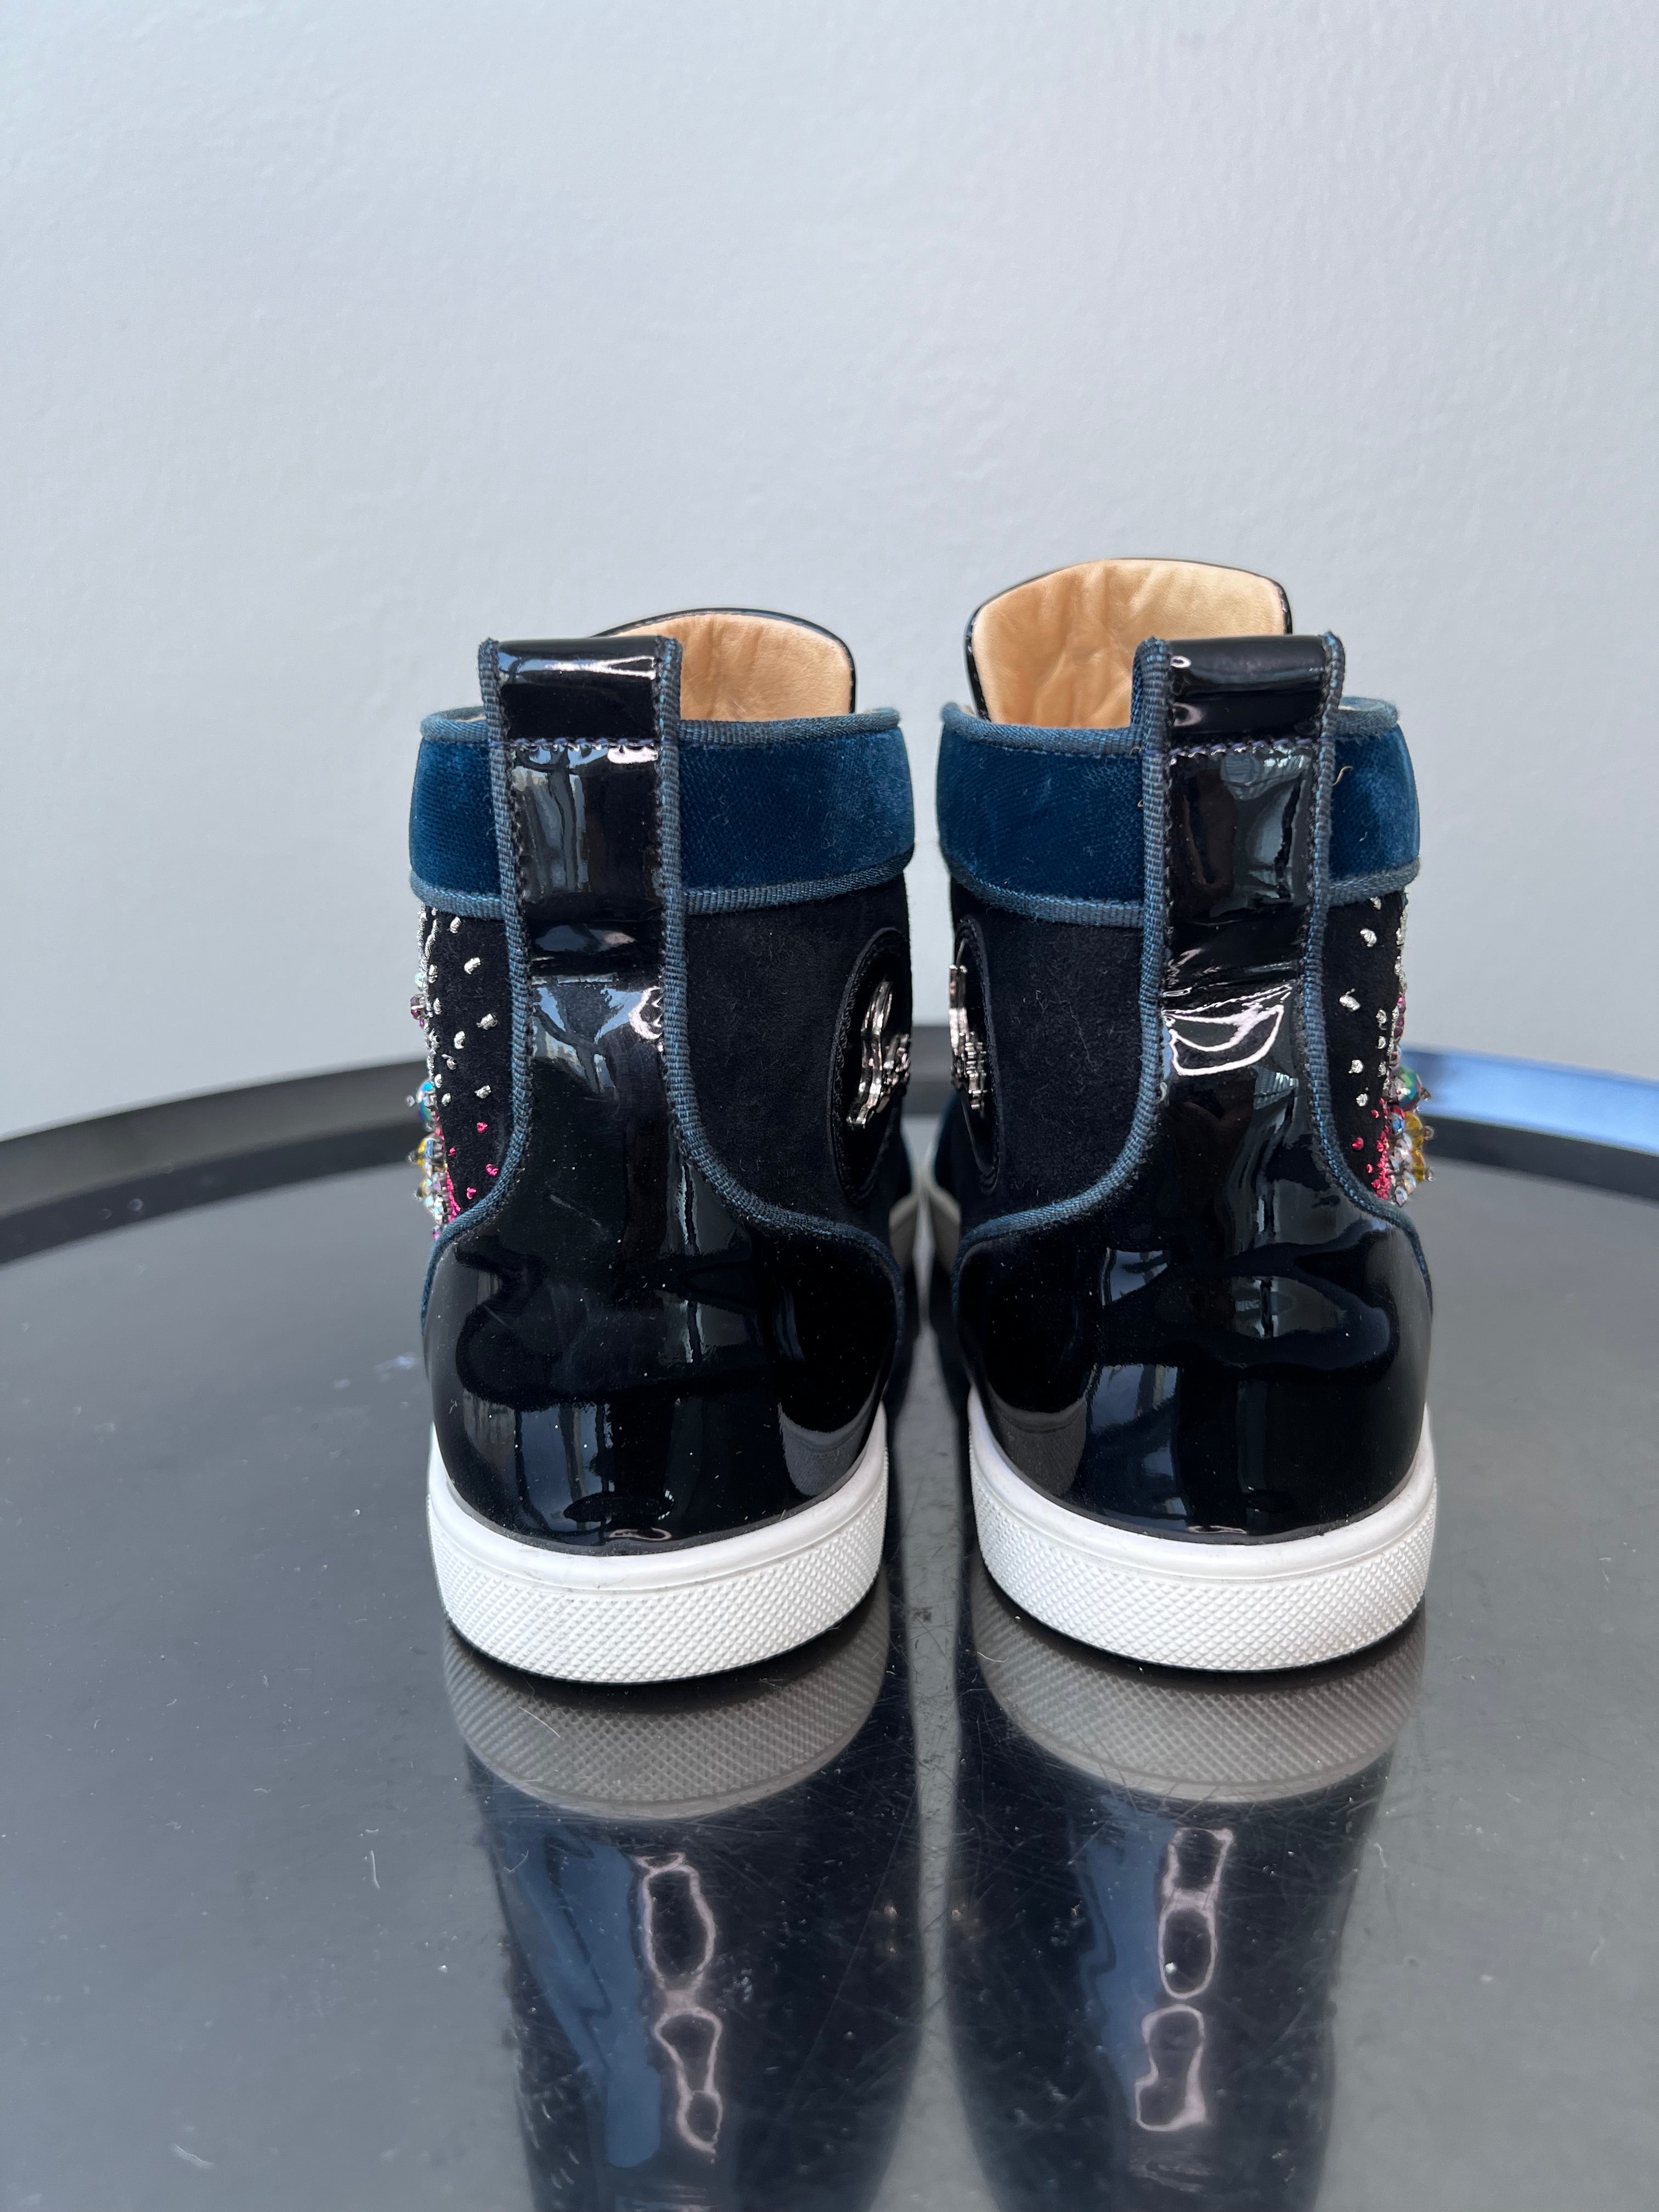 Black suede sneakers with jewel design on sides. - LOUBOUTIN